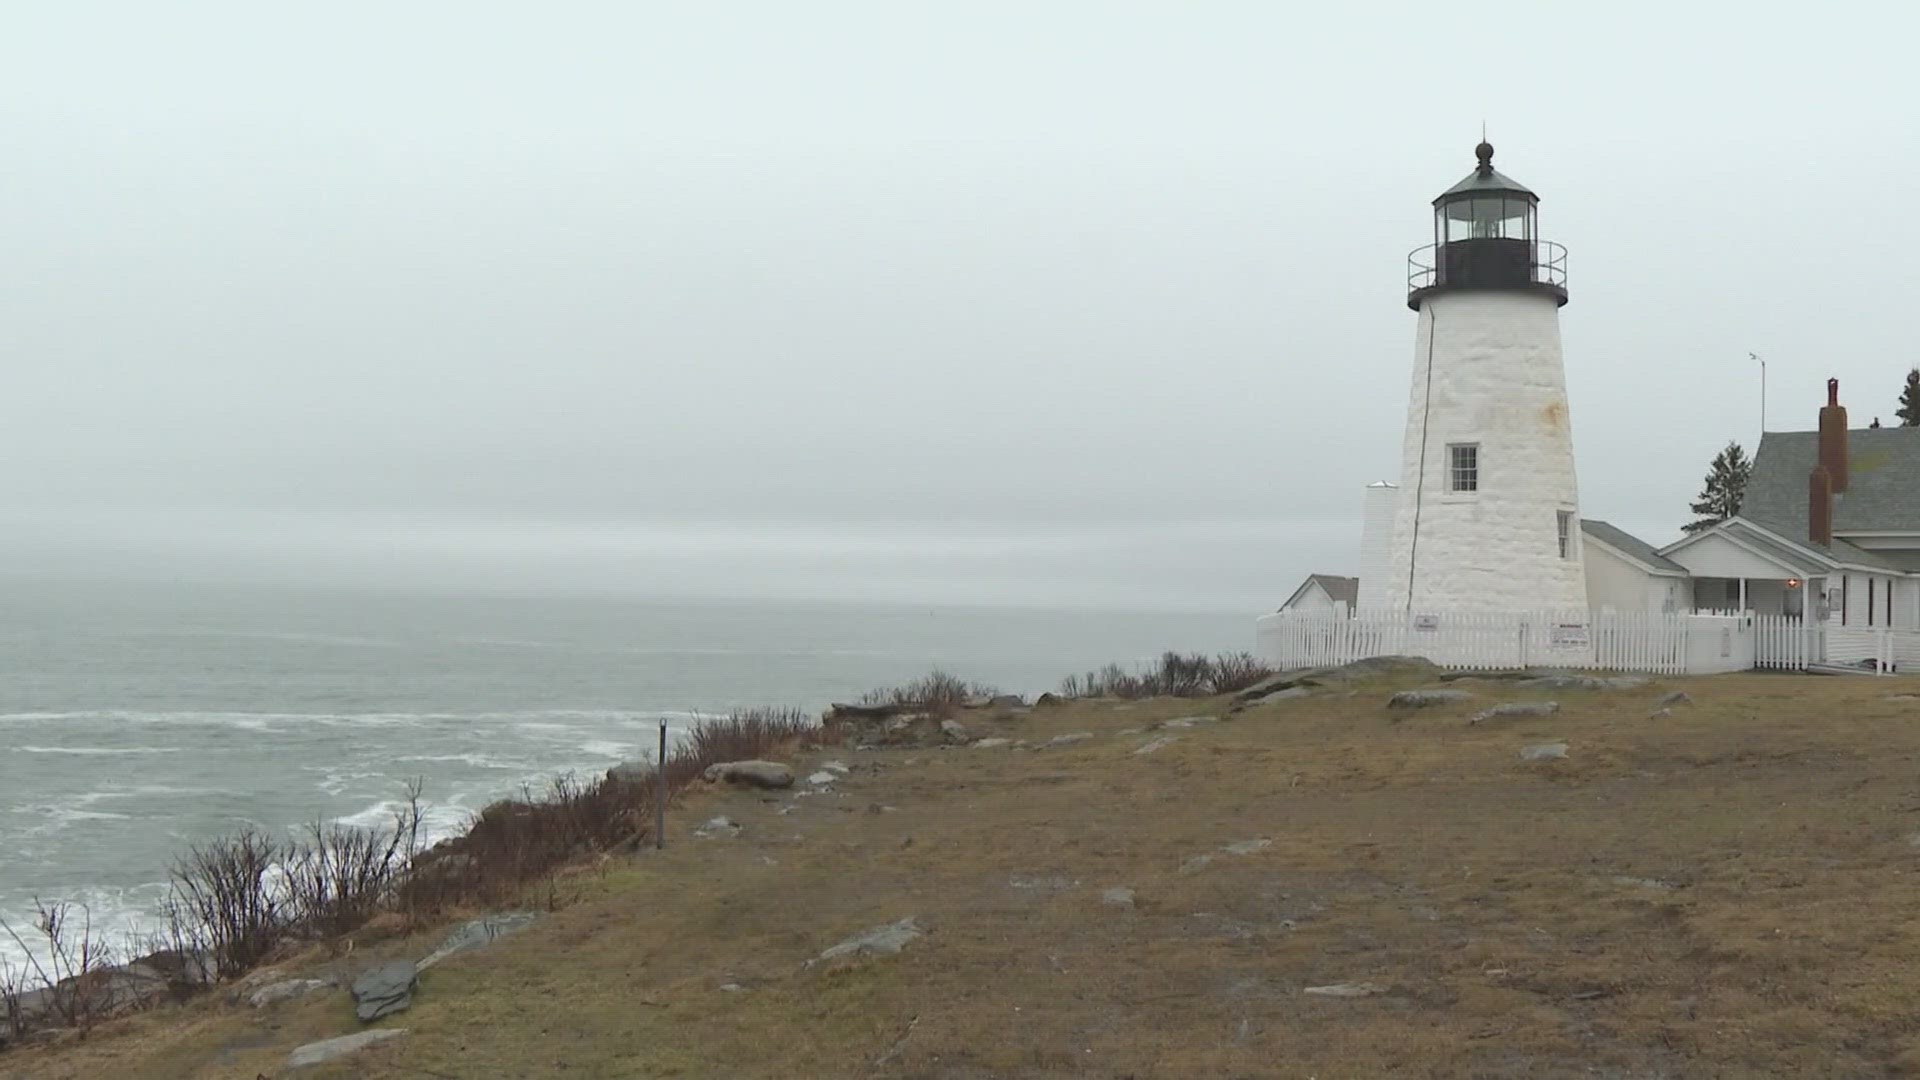 The Maine Preservation and National Lighthouse Foundation nominated 66 lighthouses along the coast for the 2025 World Monuments Fund watchlist.